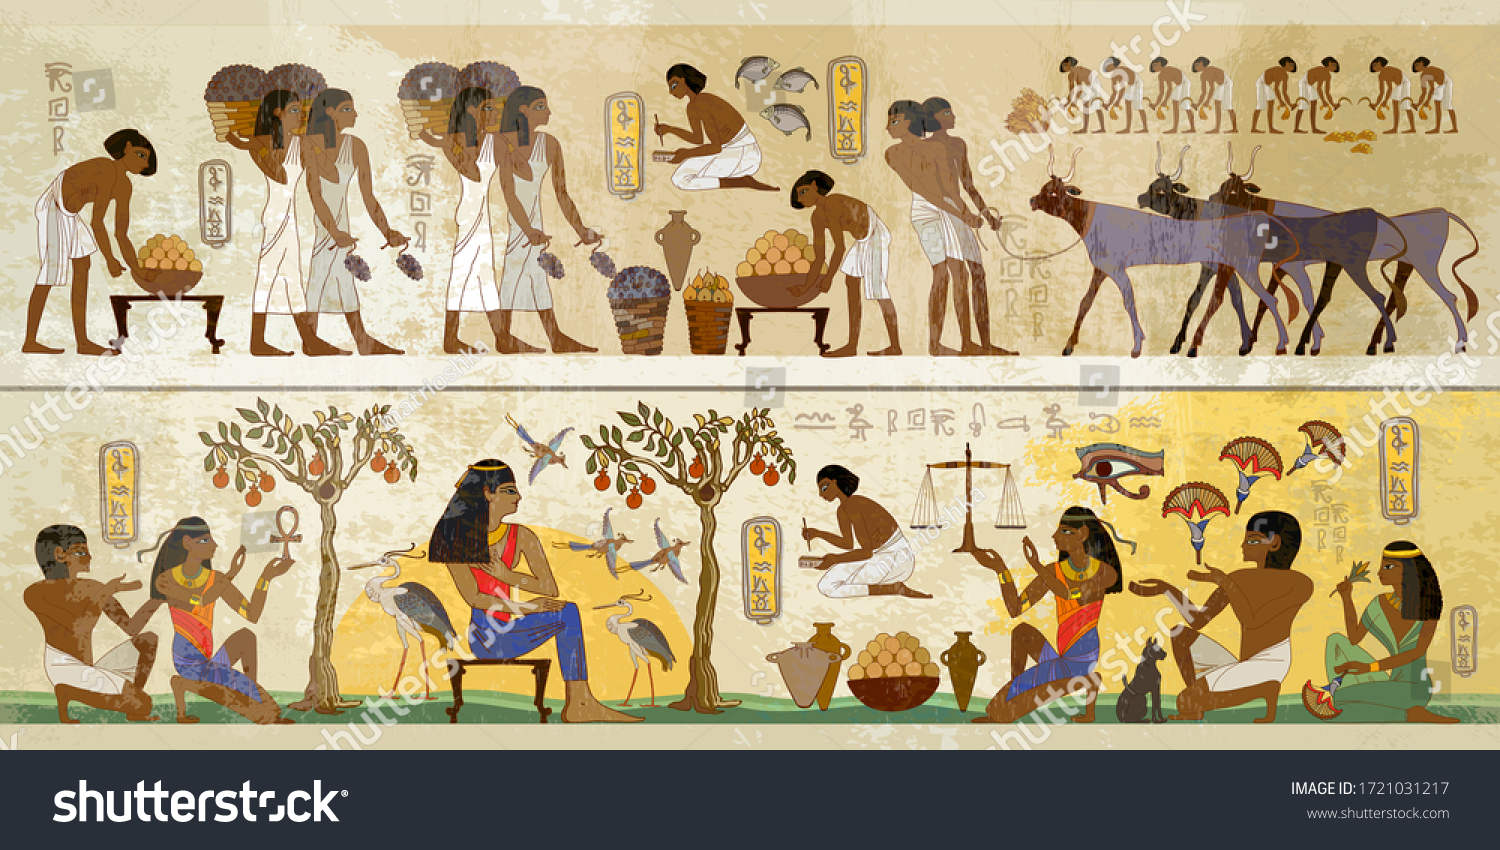 Life of egyptians. History art. Ancient Egypt frescoes. Agriculture, fishery, farm. Old tradition, religion and culture. Hieroglyphic carvings on exterior walls of an old temple